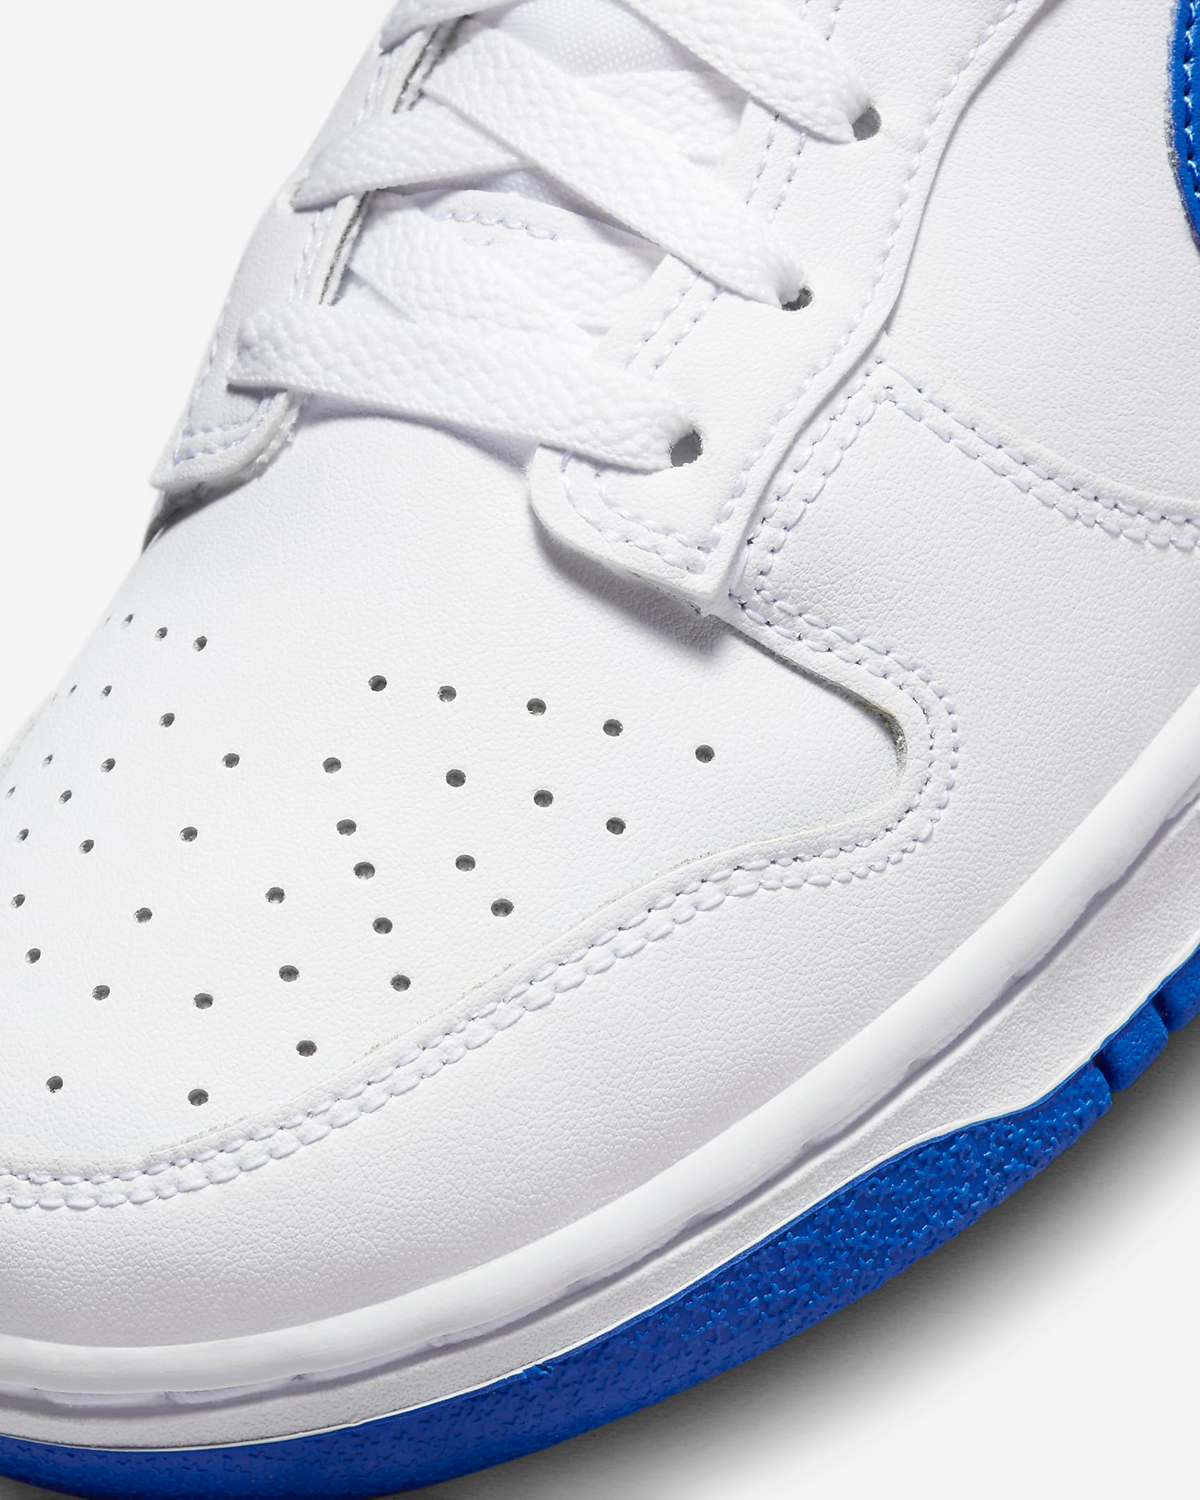 Nike-Dunk-Low-White-Hyper-Royal-Release-Date-7